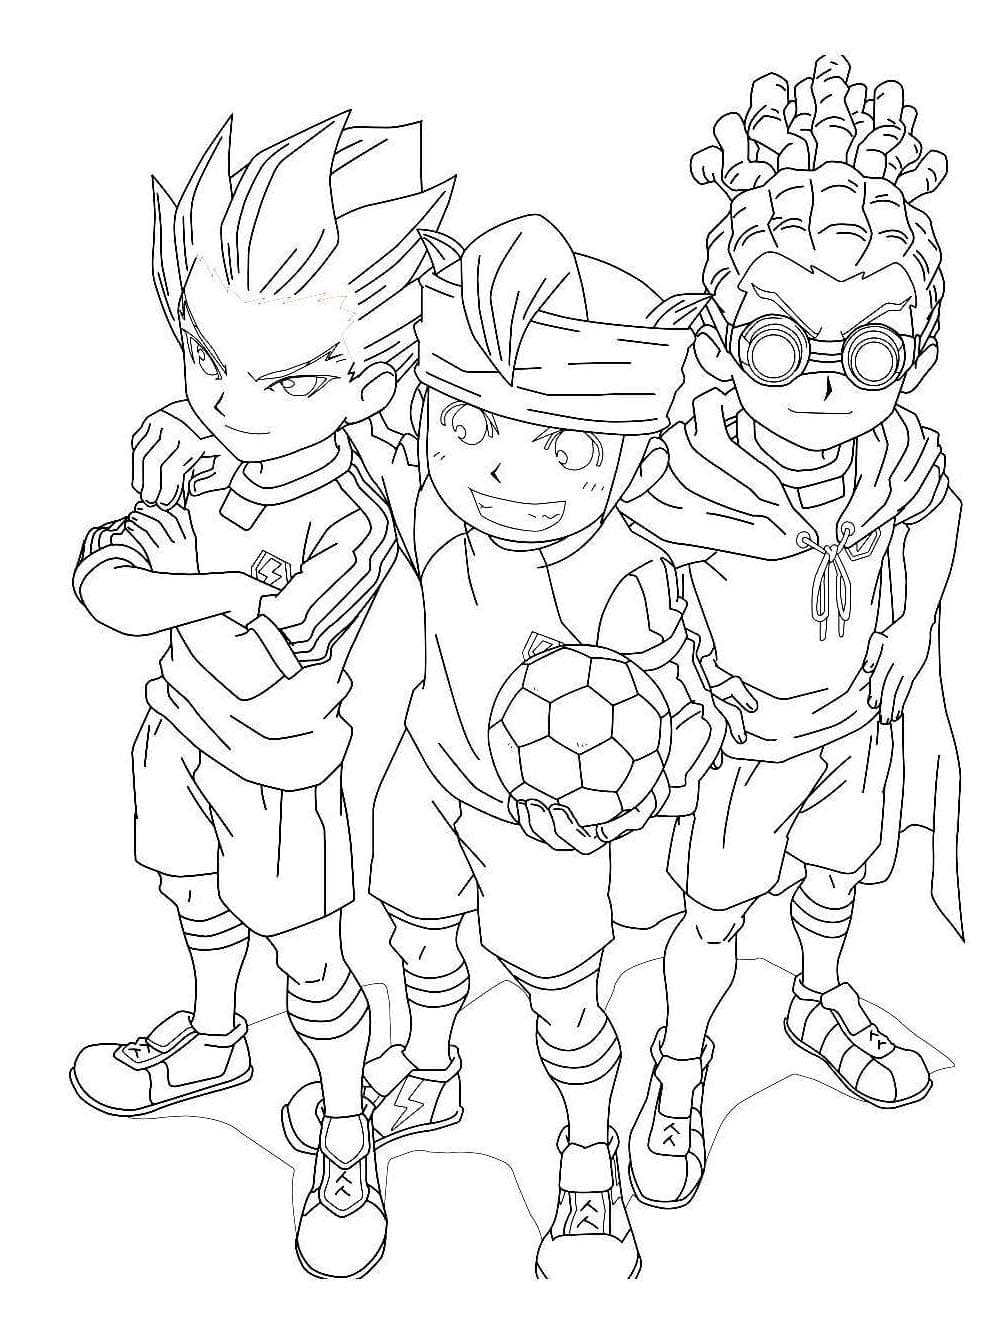 Characters in Inazuma Eleven